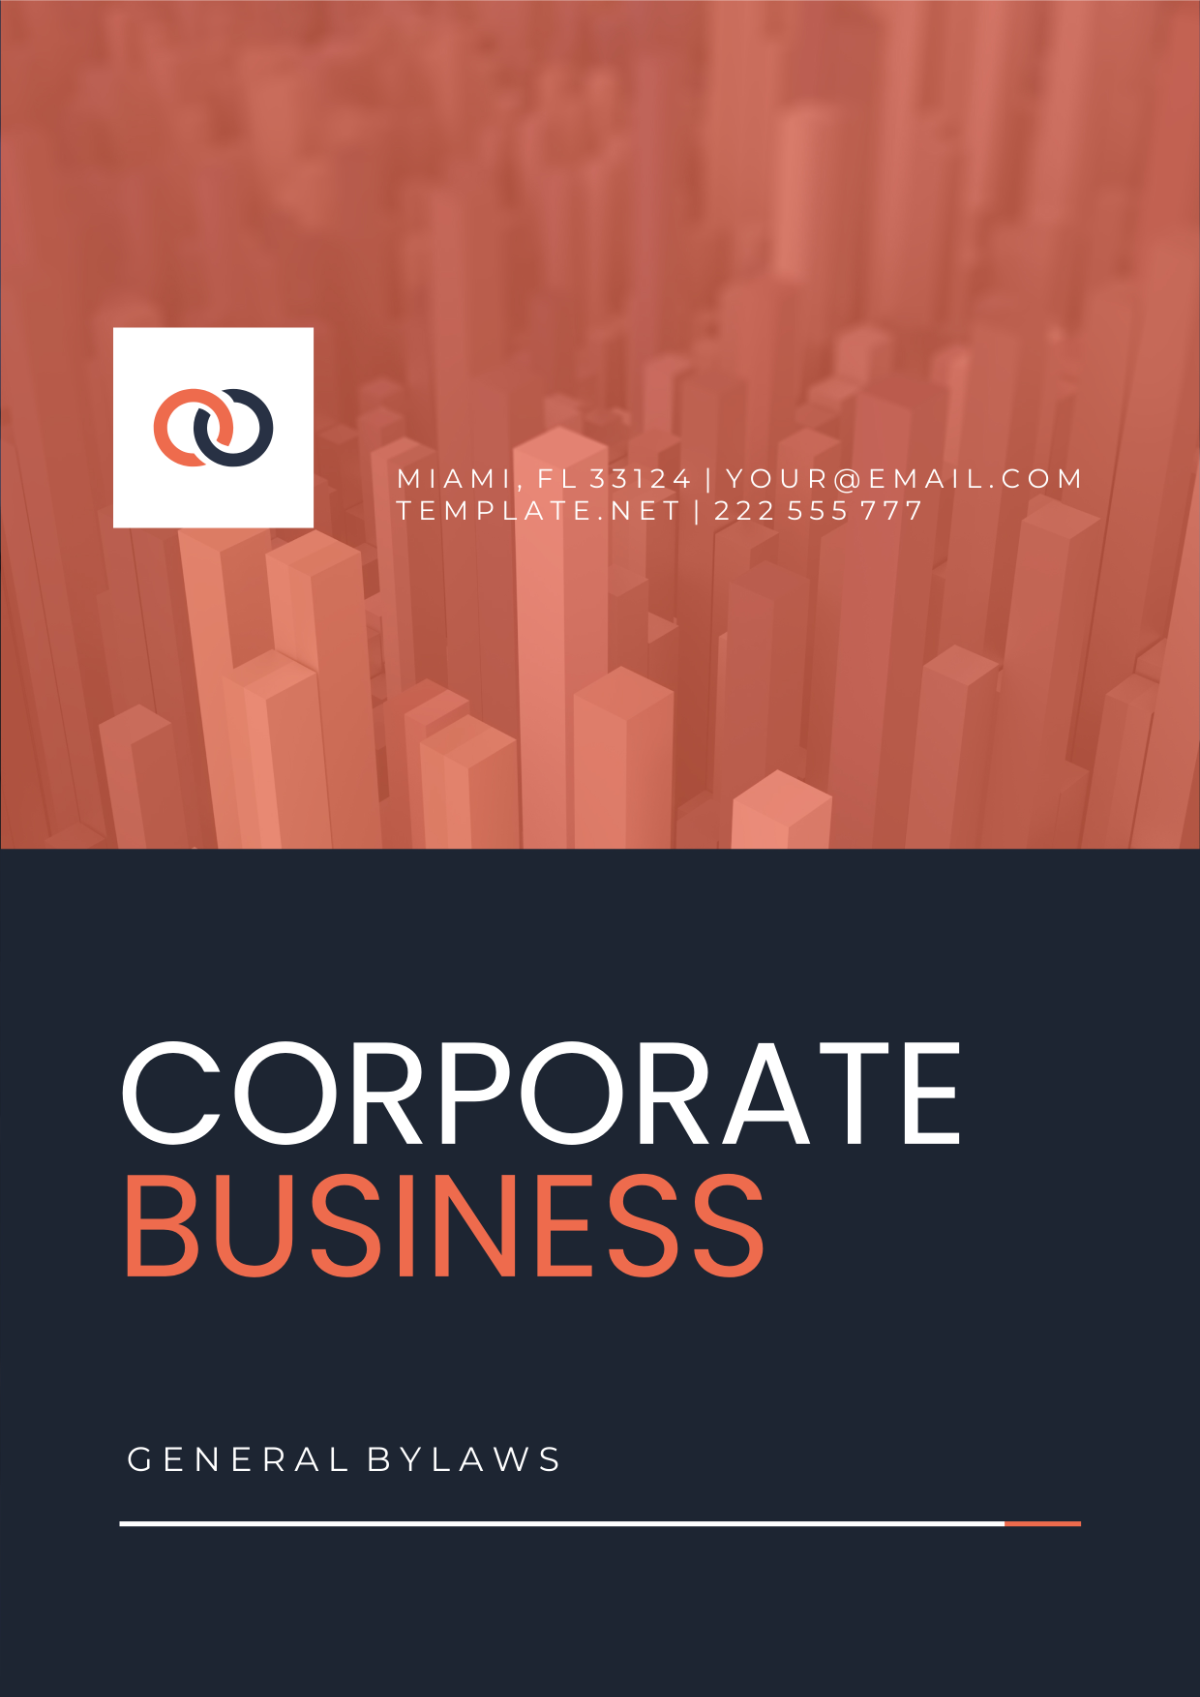 Corporate Bylaws Cover Page